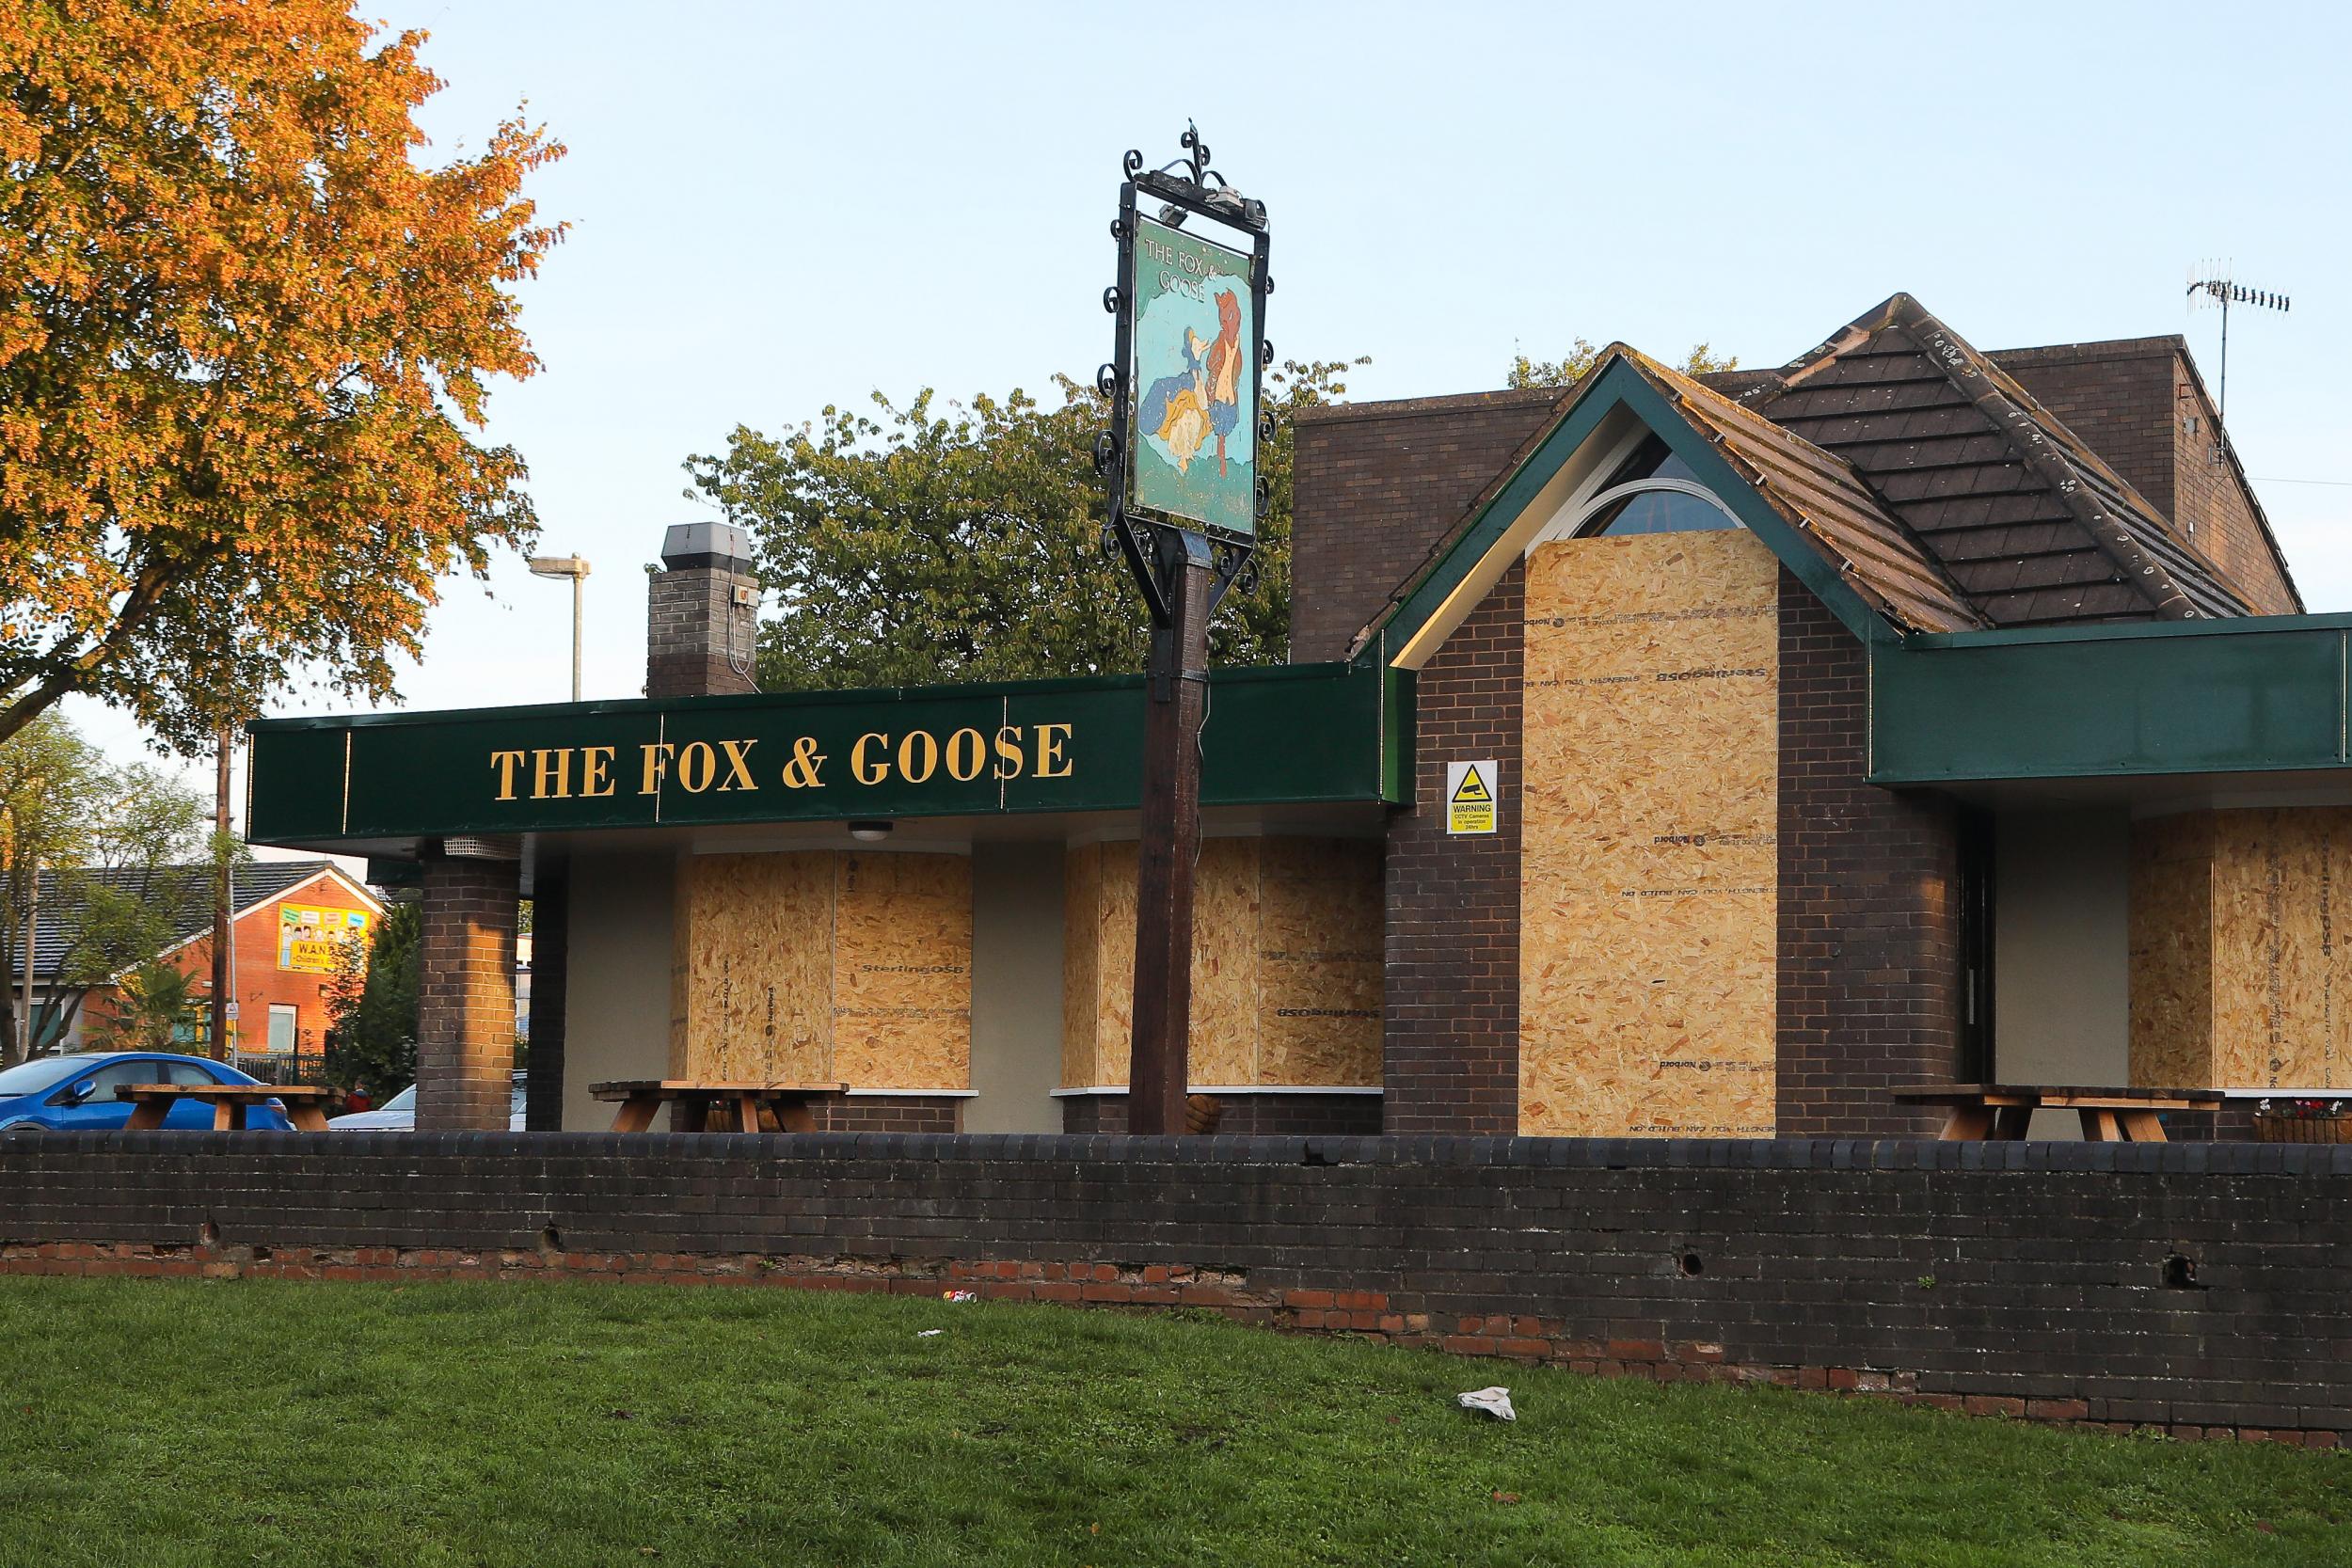 The Fox and Goose pub in Droitwich has been closed after just seven weeks